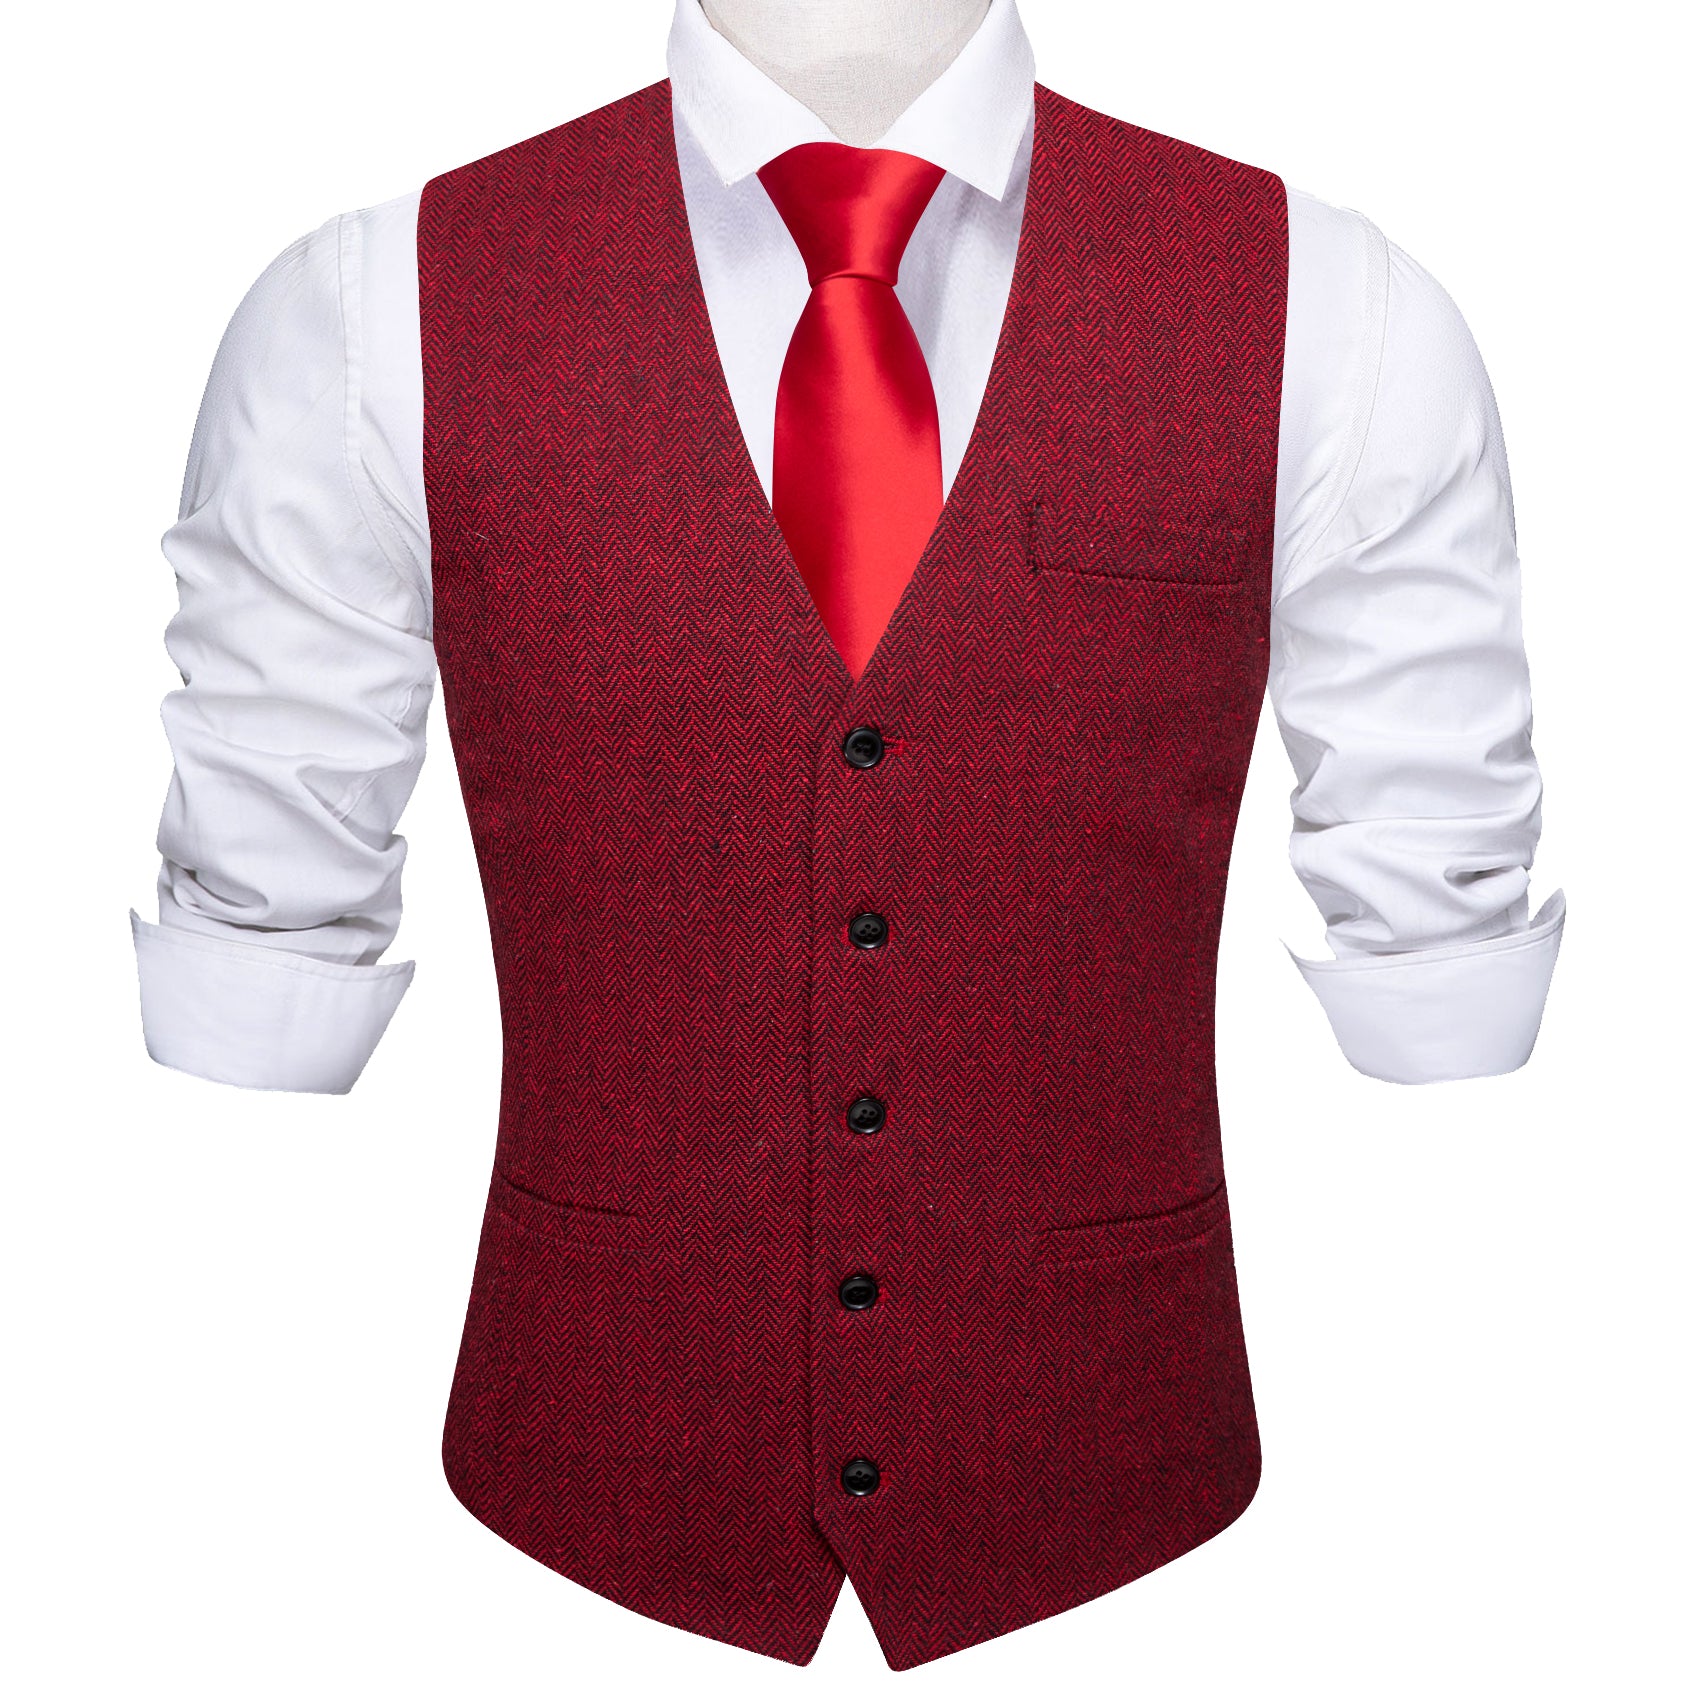 Barry.wang Fashion Red Solid Vest Waistcoat Set